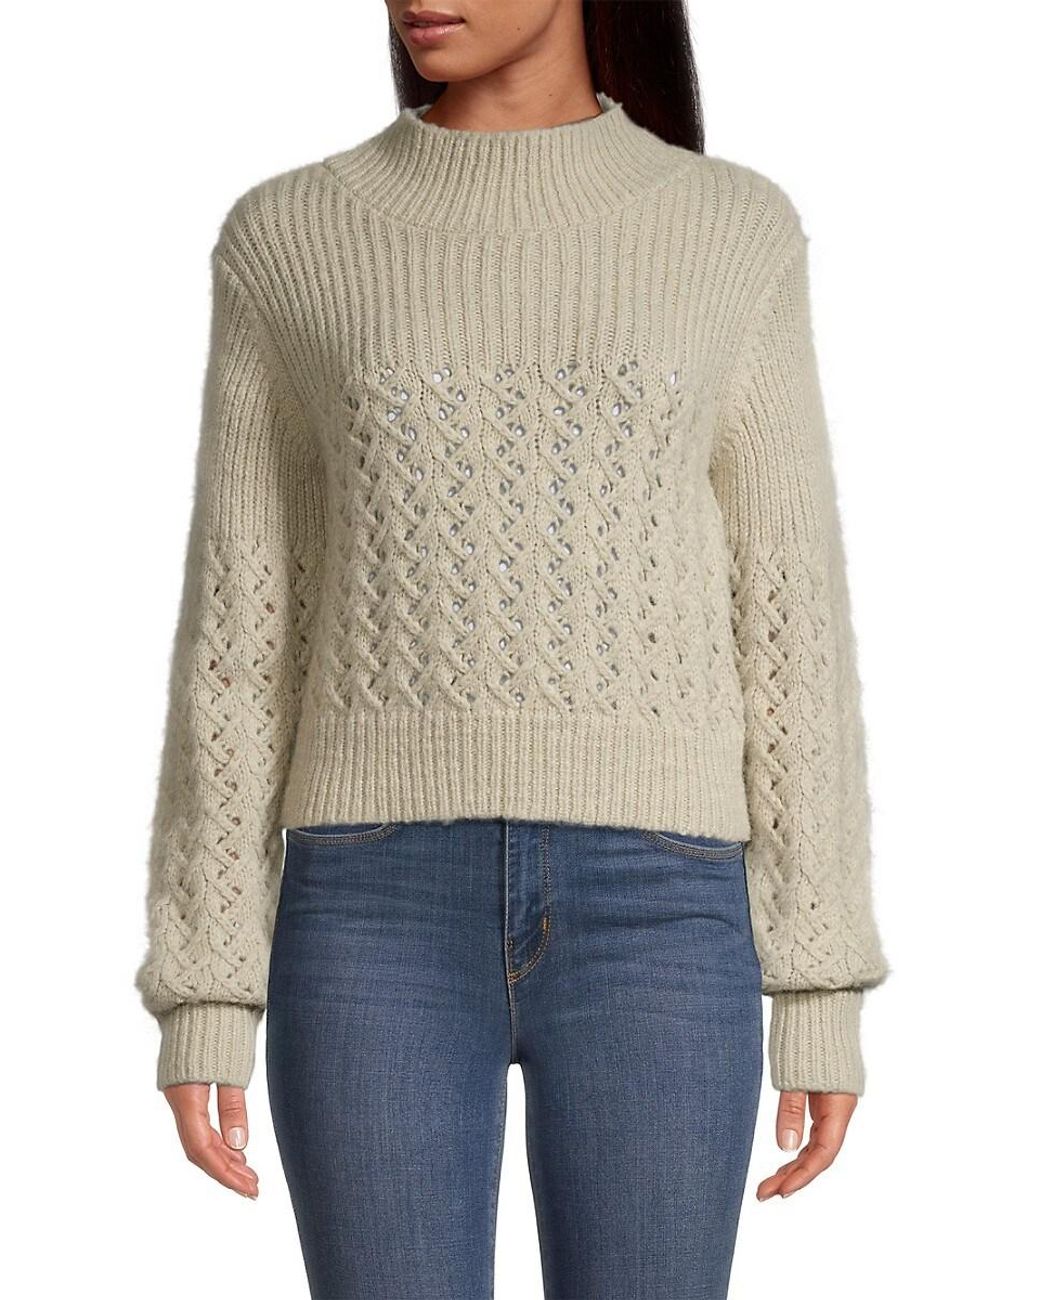 Rebecca Taylor Chainette Turtleneck Sweater | Lyst